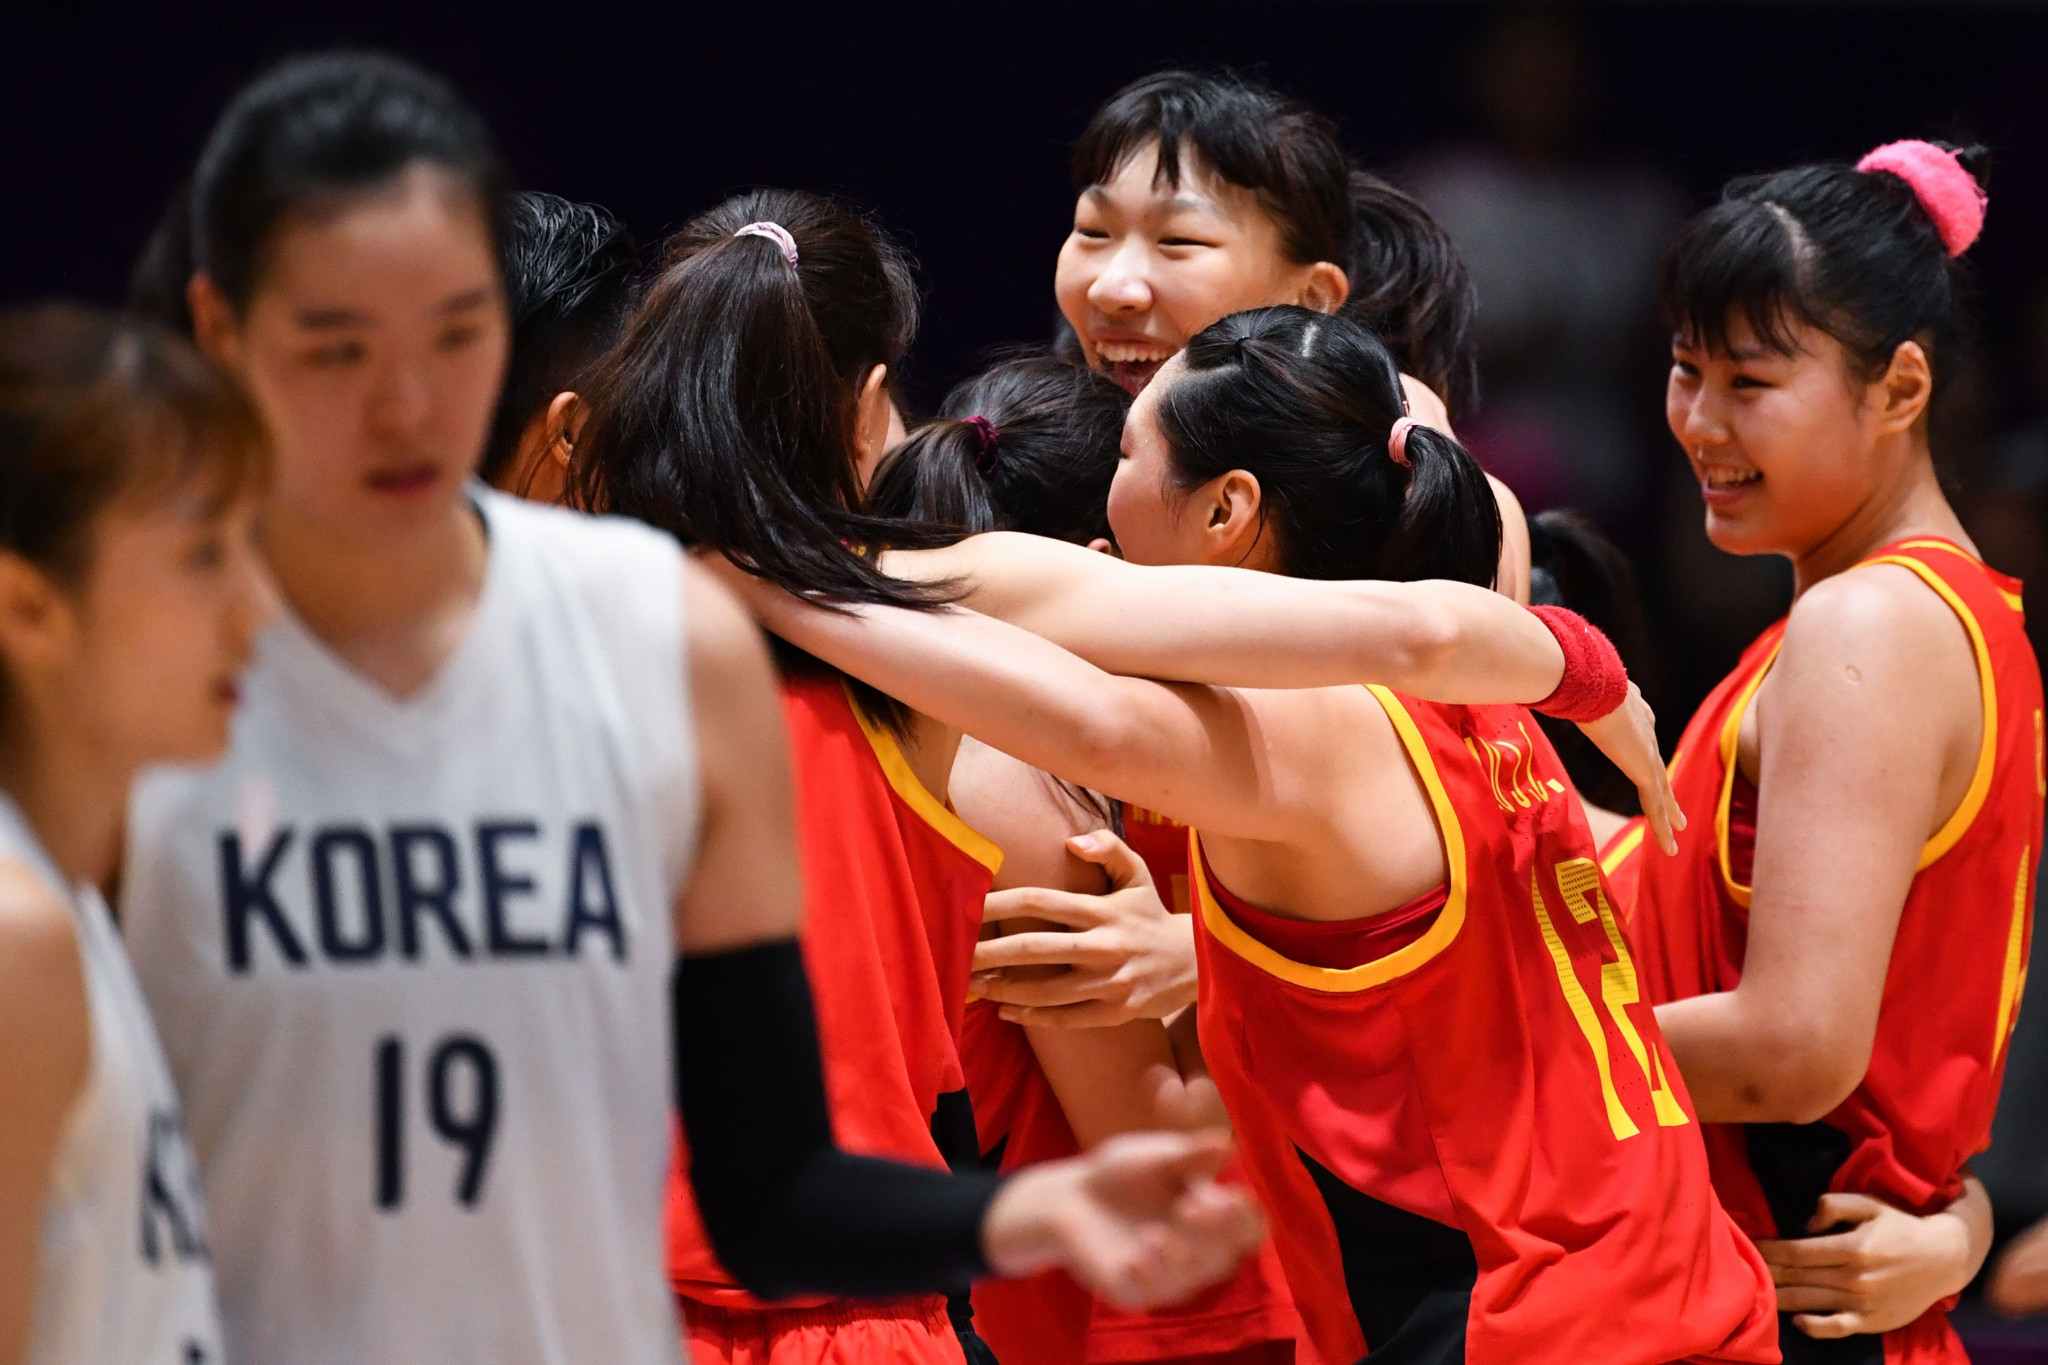 Unified Korean team miss out on women's gold medal as China claim basketball 5x5 double at 2018 Asian Games